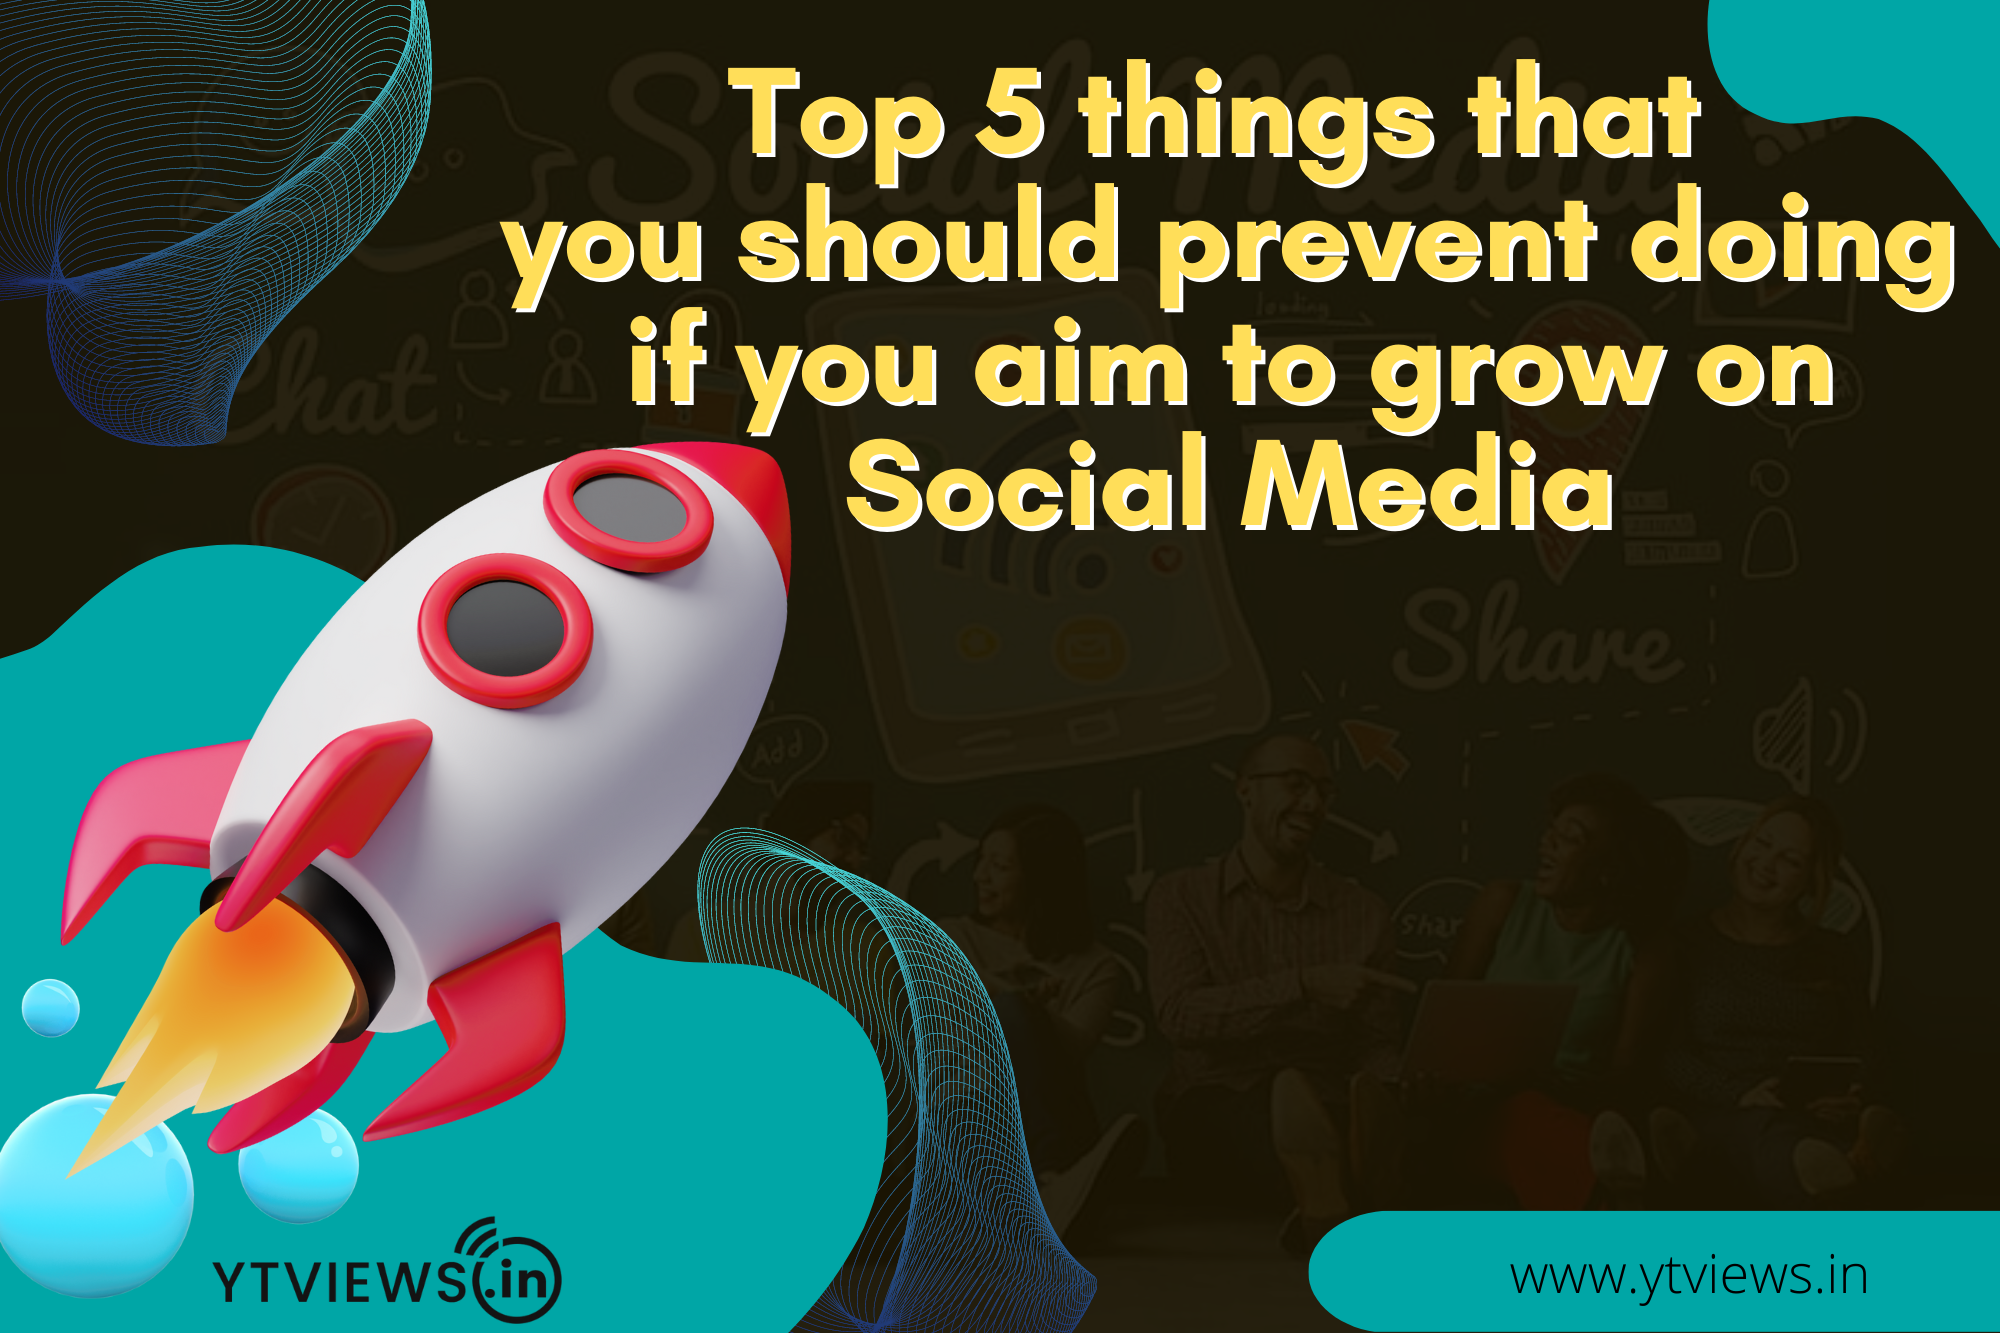 Top 5 things that you should prevent doing if you aim to grow on social media